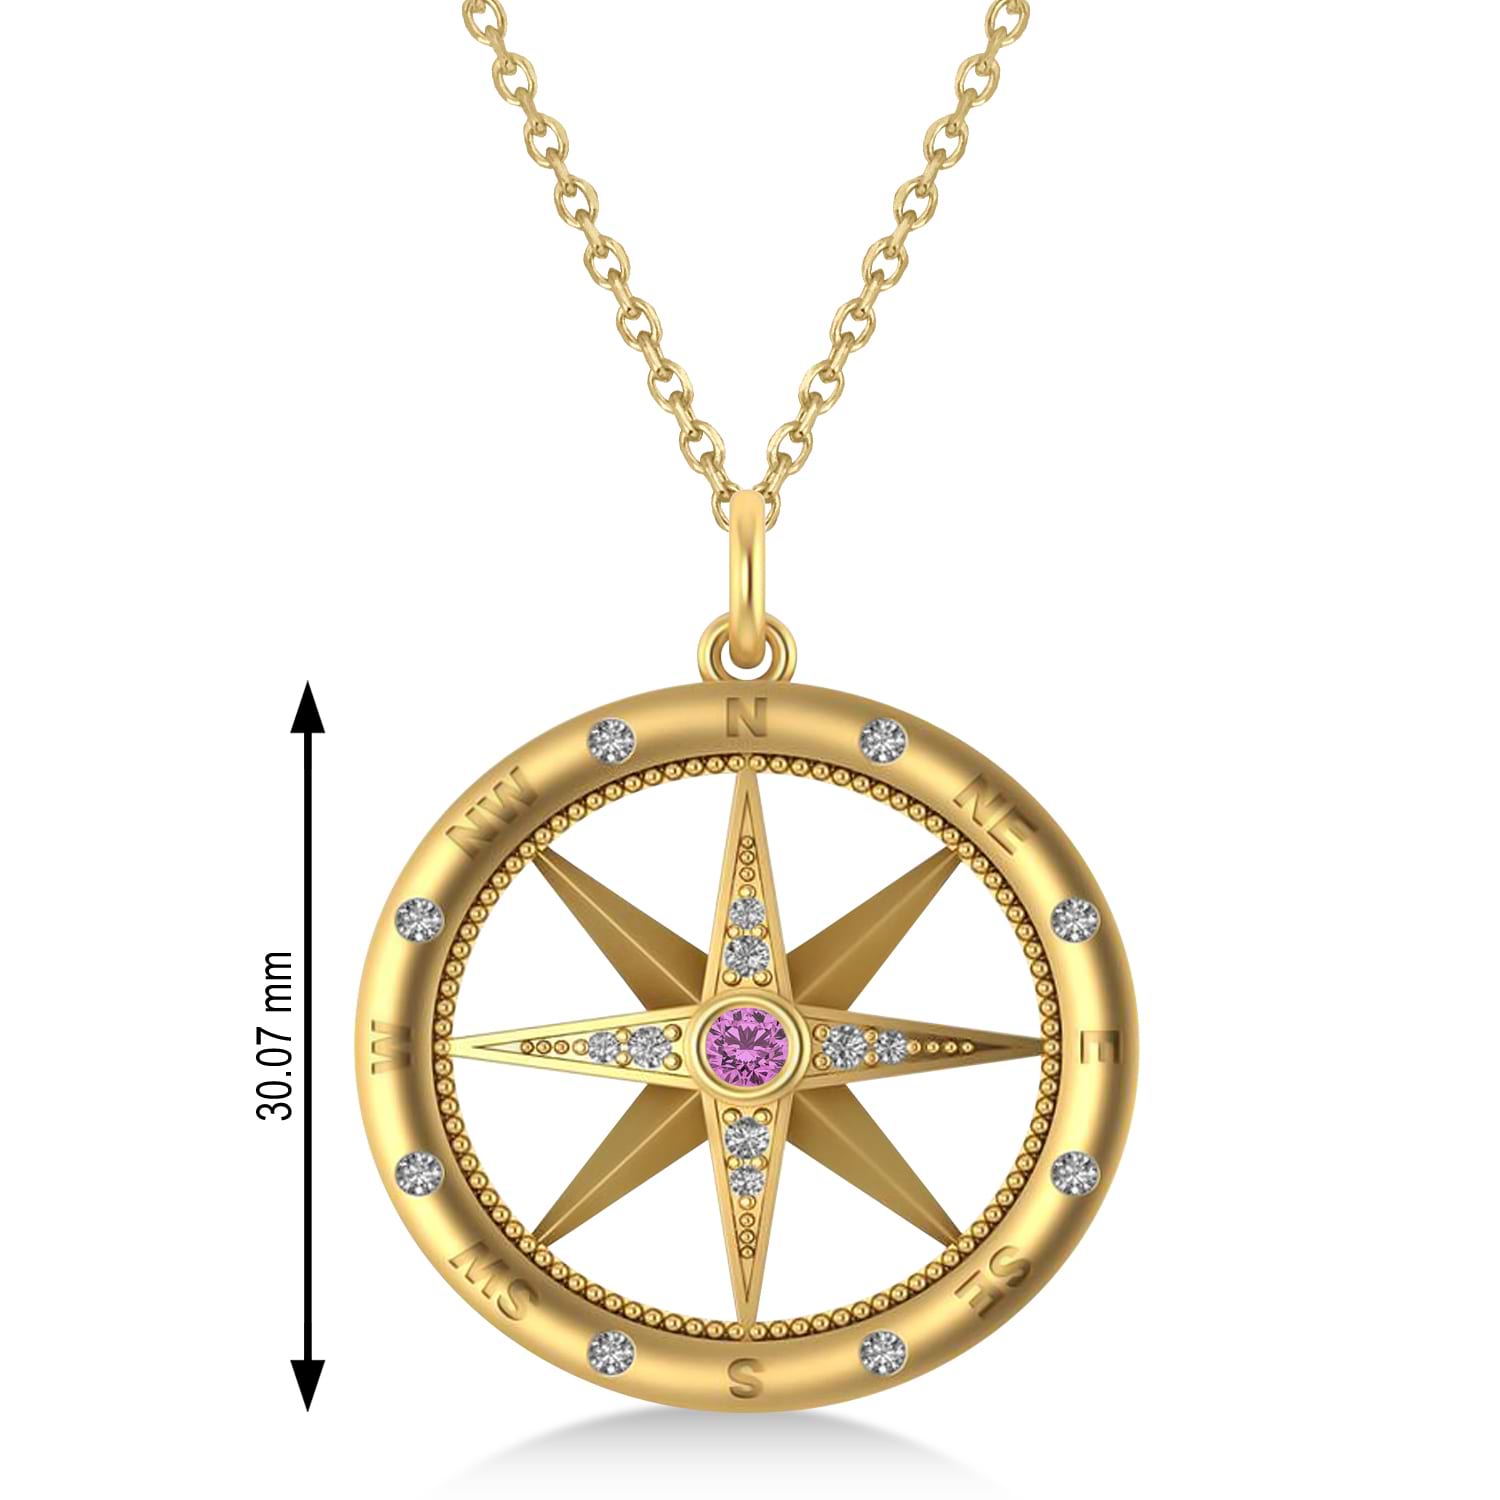 Large Compass Pendant For Men Pink Sapphire & Diamond Accented 14k Yellow Gold (0.38ct)